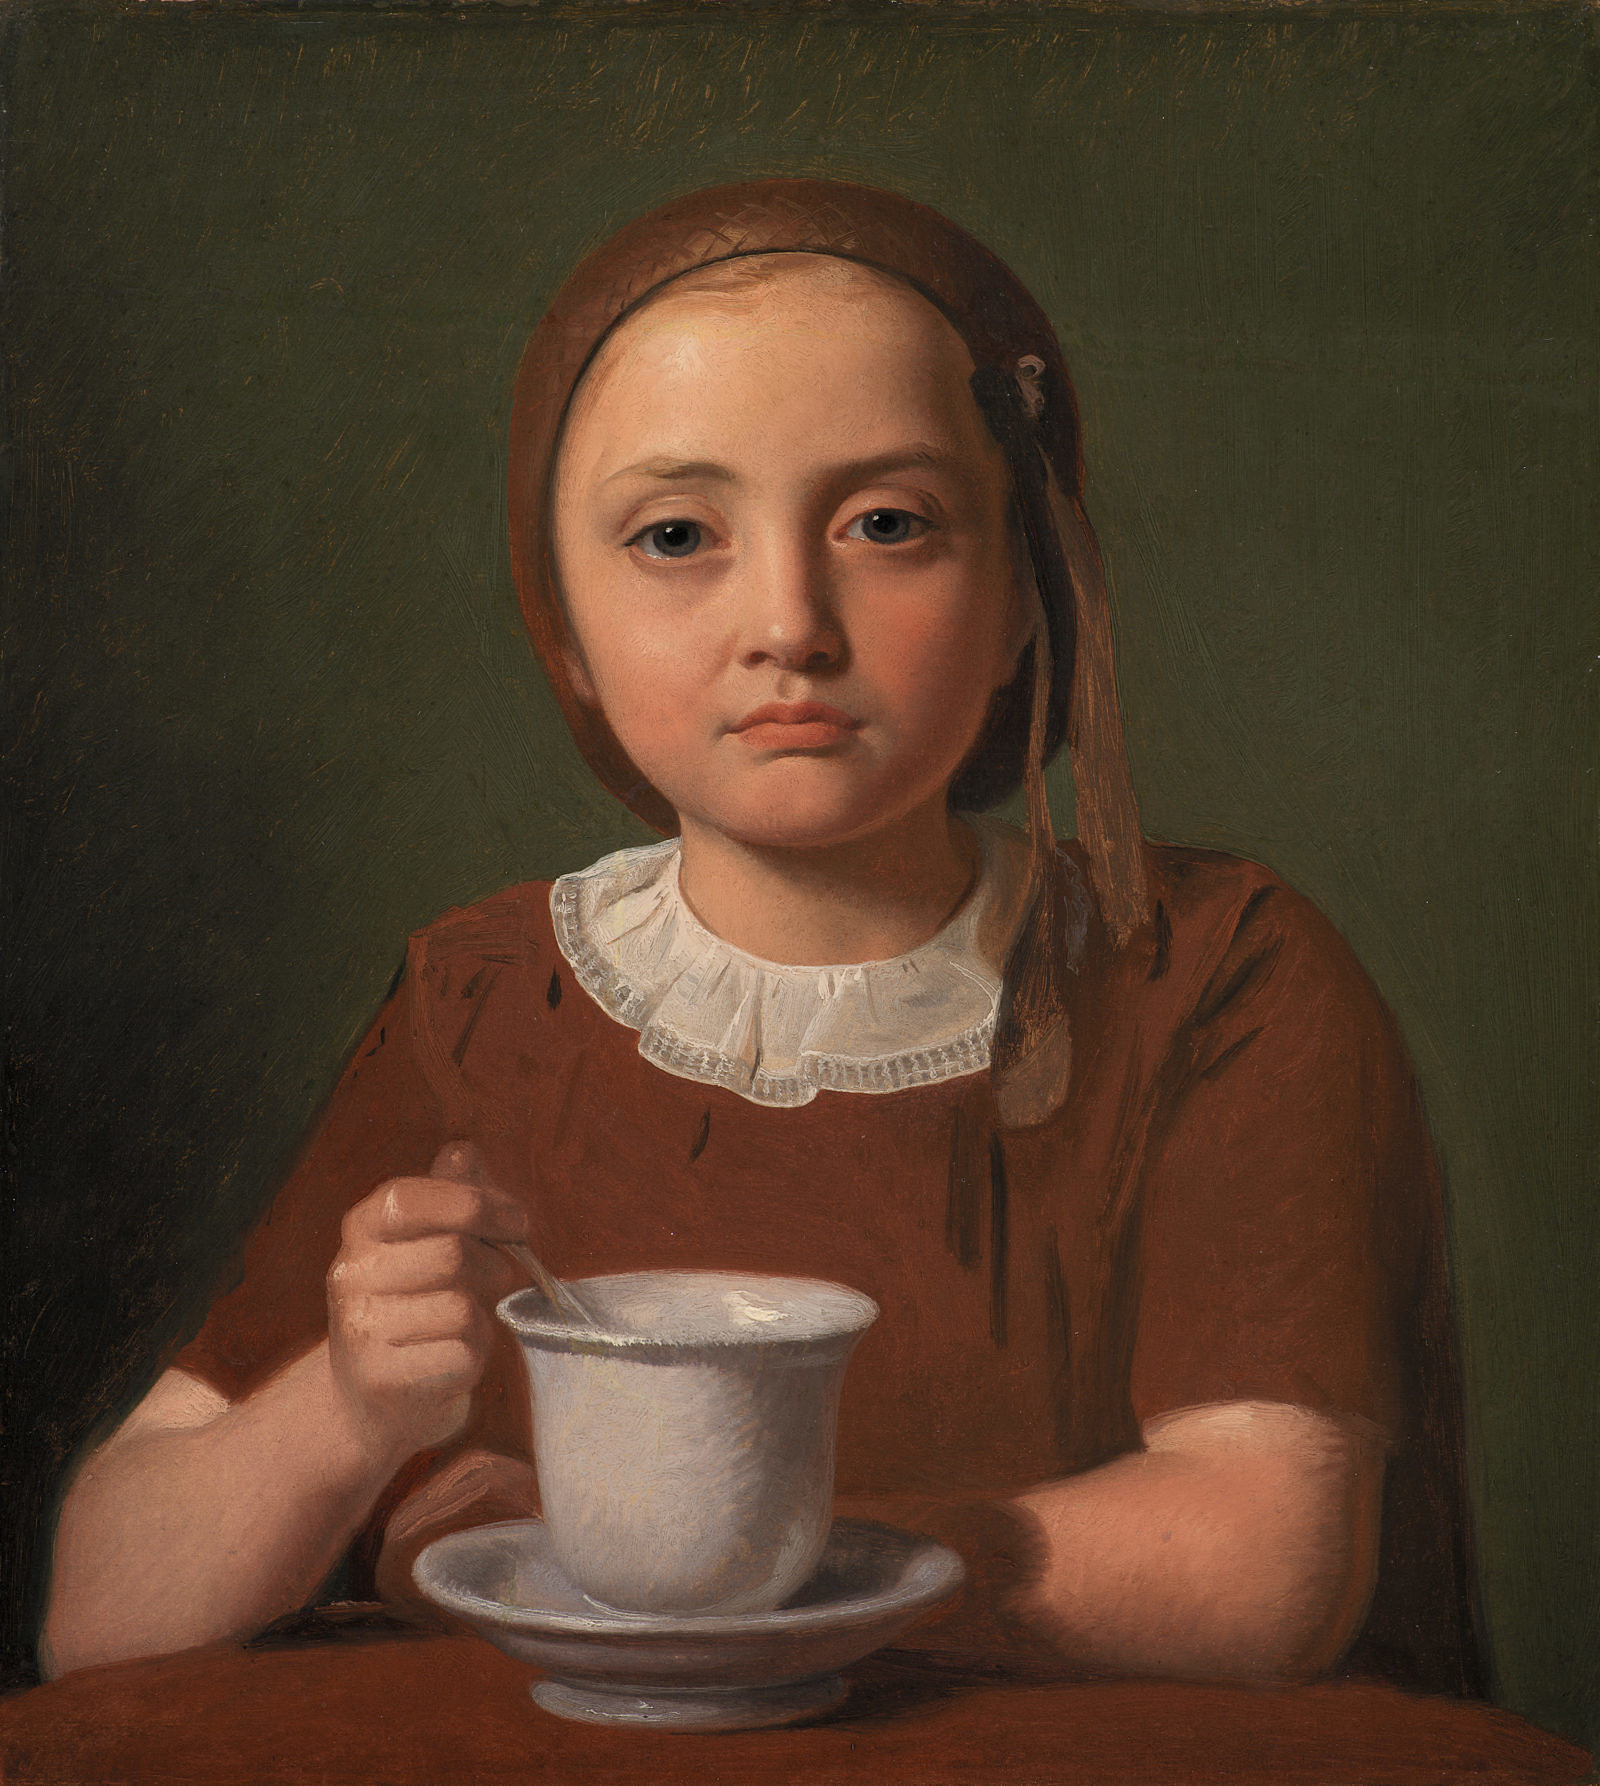 Portrait of a Little Girl, Elise Købke, with a Cup by Carl Christian Constantin Hansen - 1850 - 39 x 35.5 cm Statens Museum for Kunst